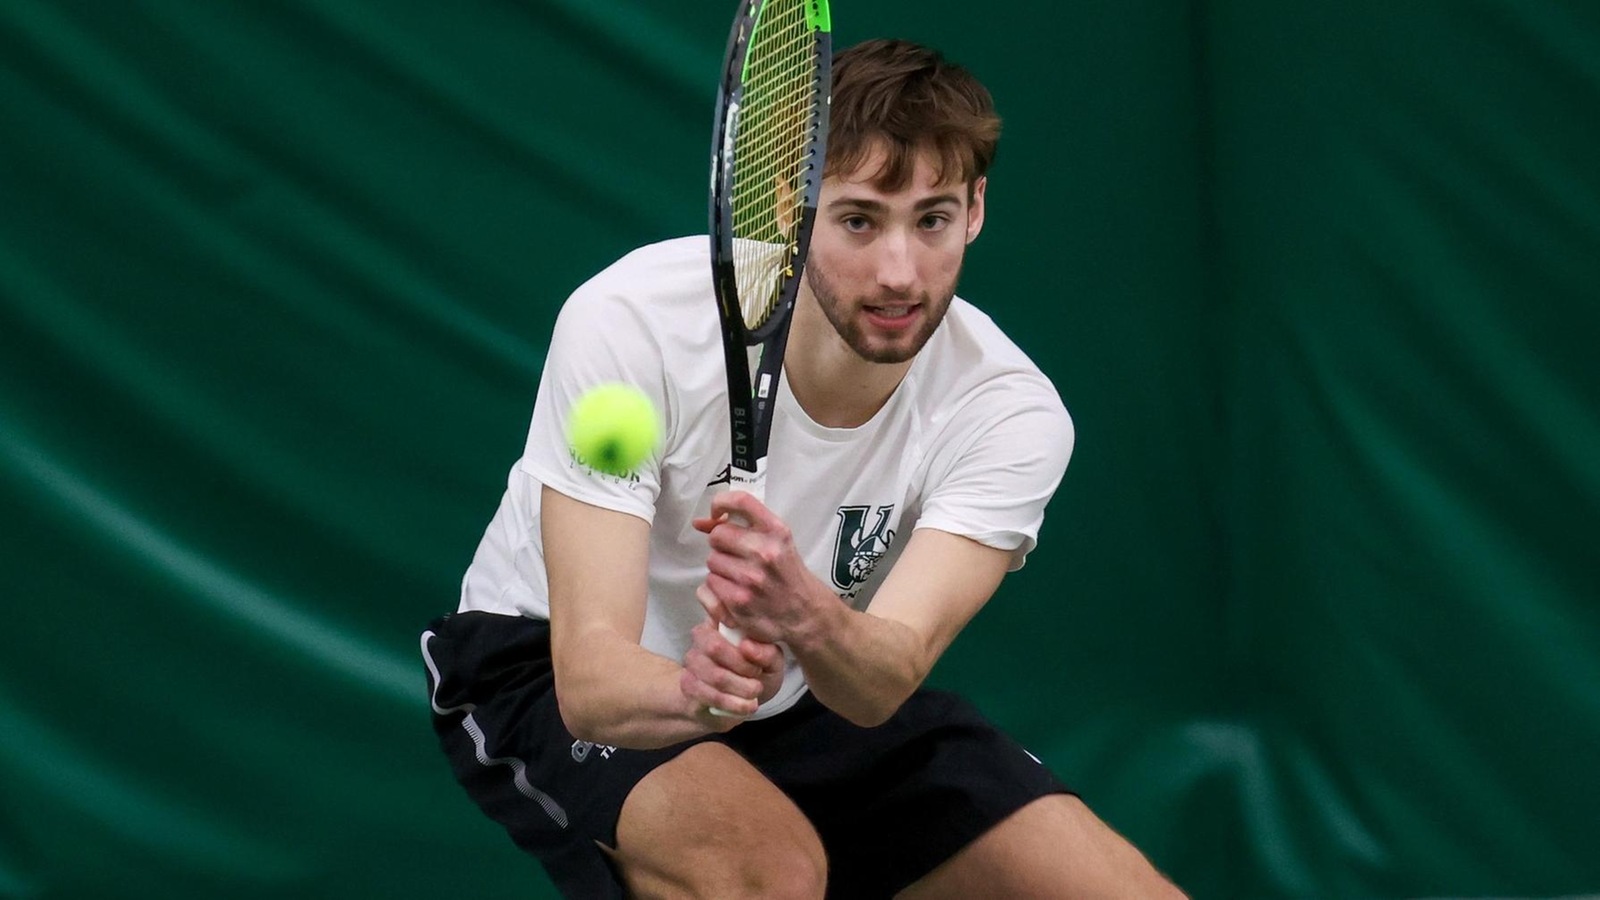 Vikings Open March With Match At Western Michigan